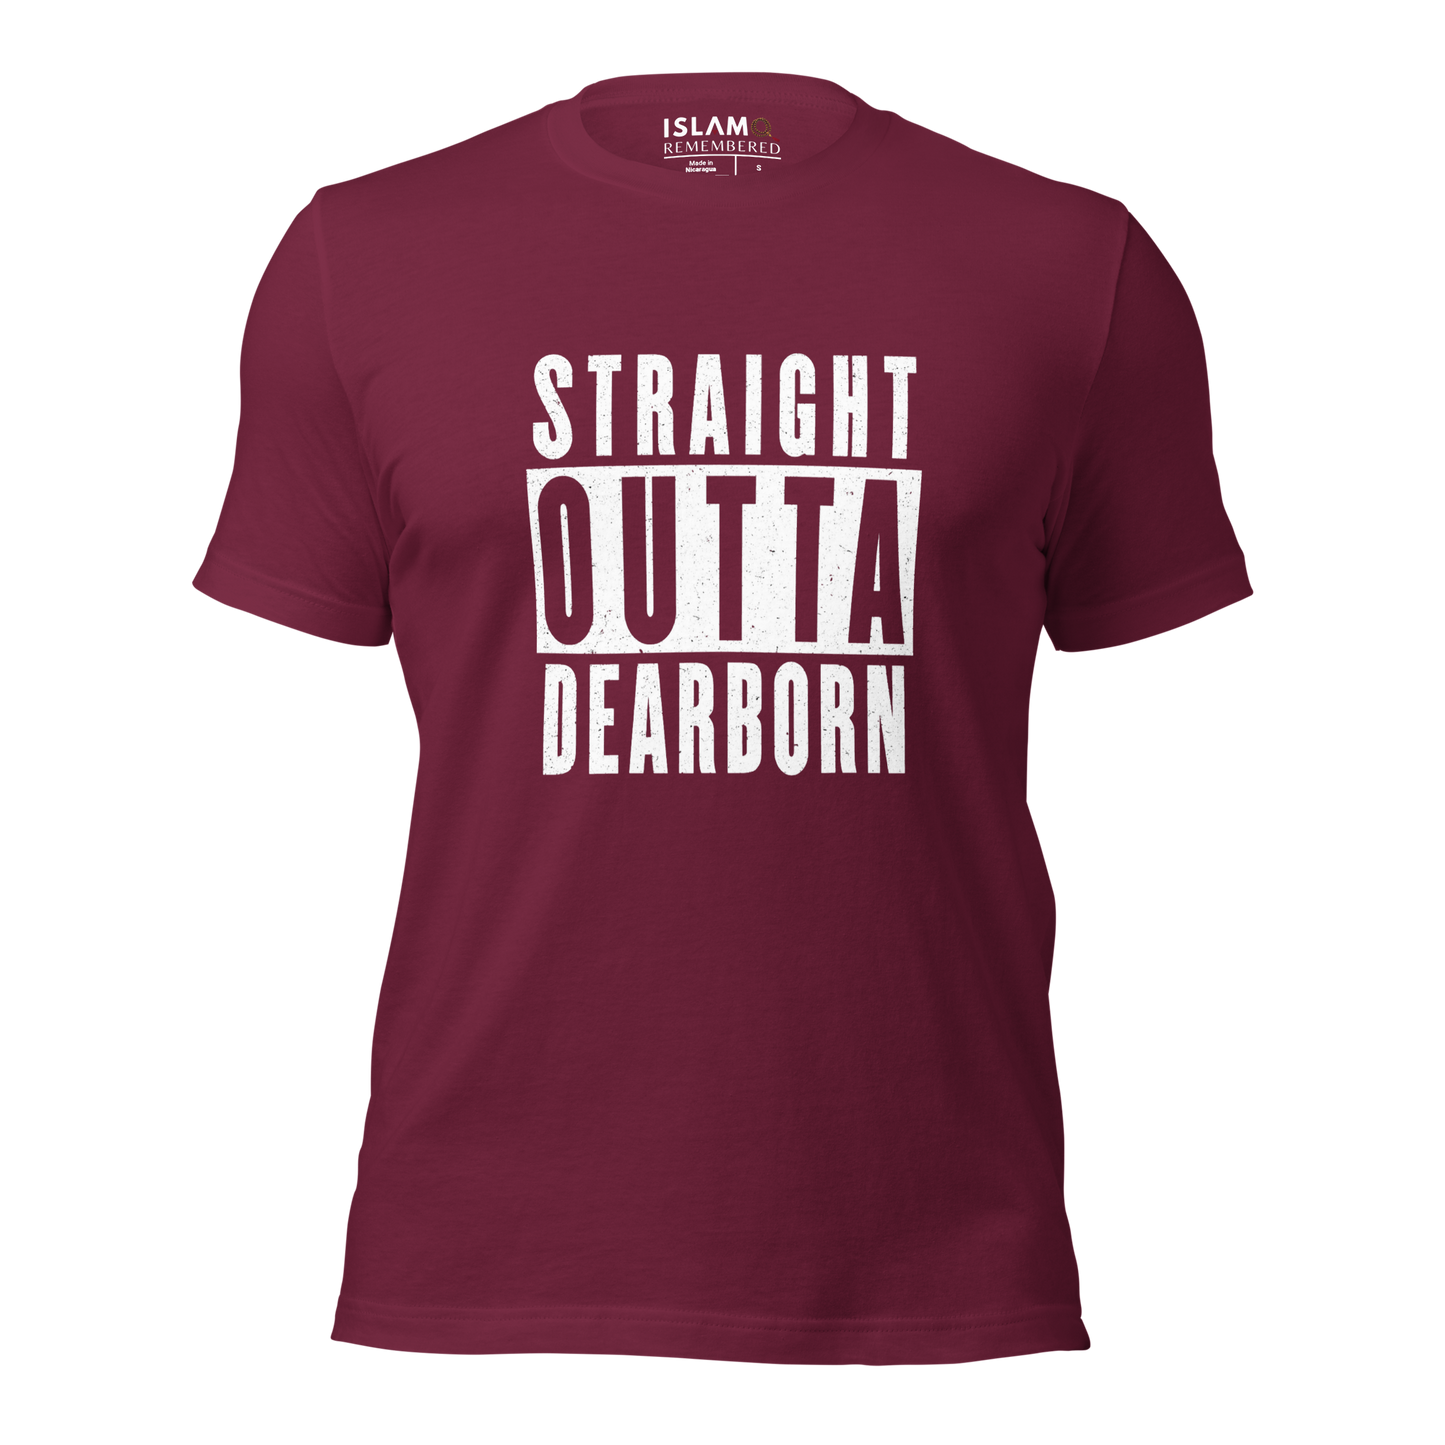 ADULT T-Shirt - STRAIGHT OUTTA DEARBORN